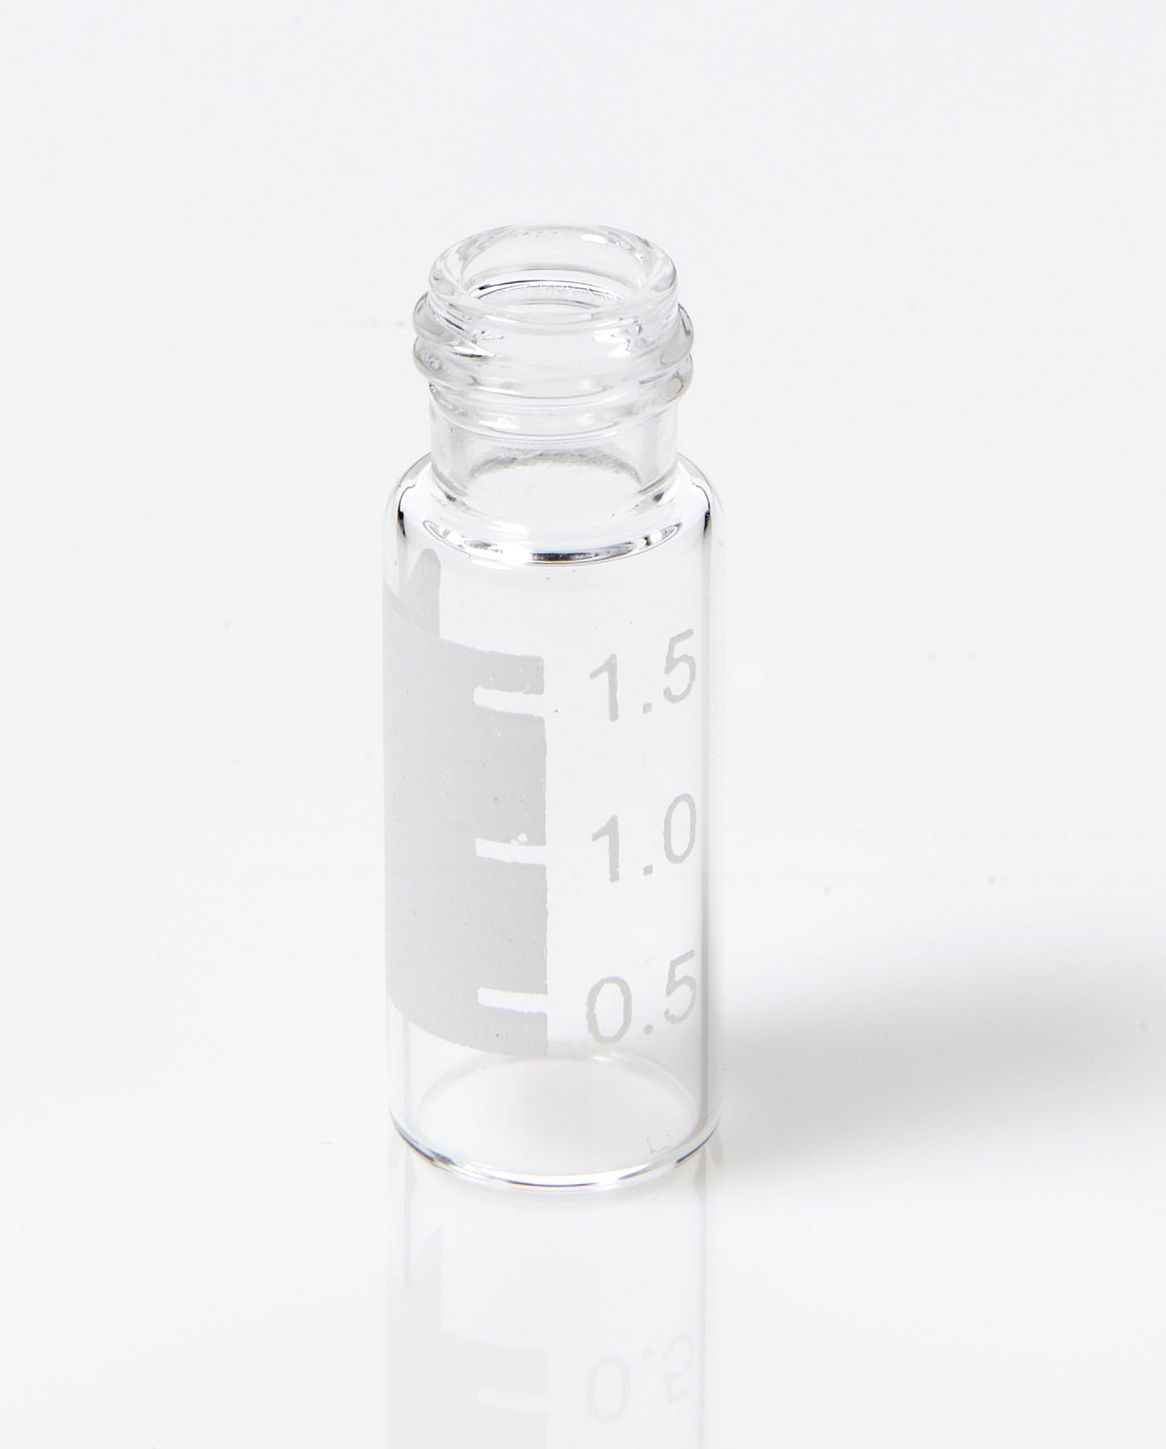 Vial 2mL Clear Glass (12x32mm) with Graduated Marking Spot Wide Mouth 9-425 Screw, 100/pk